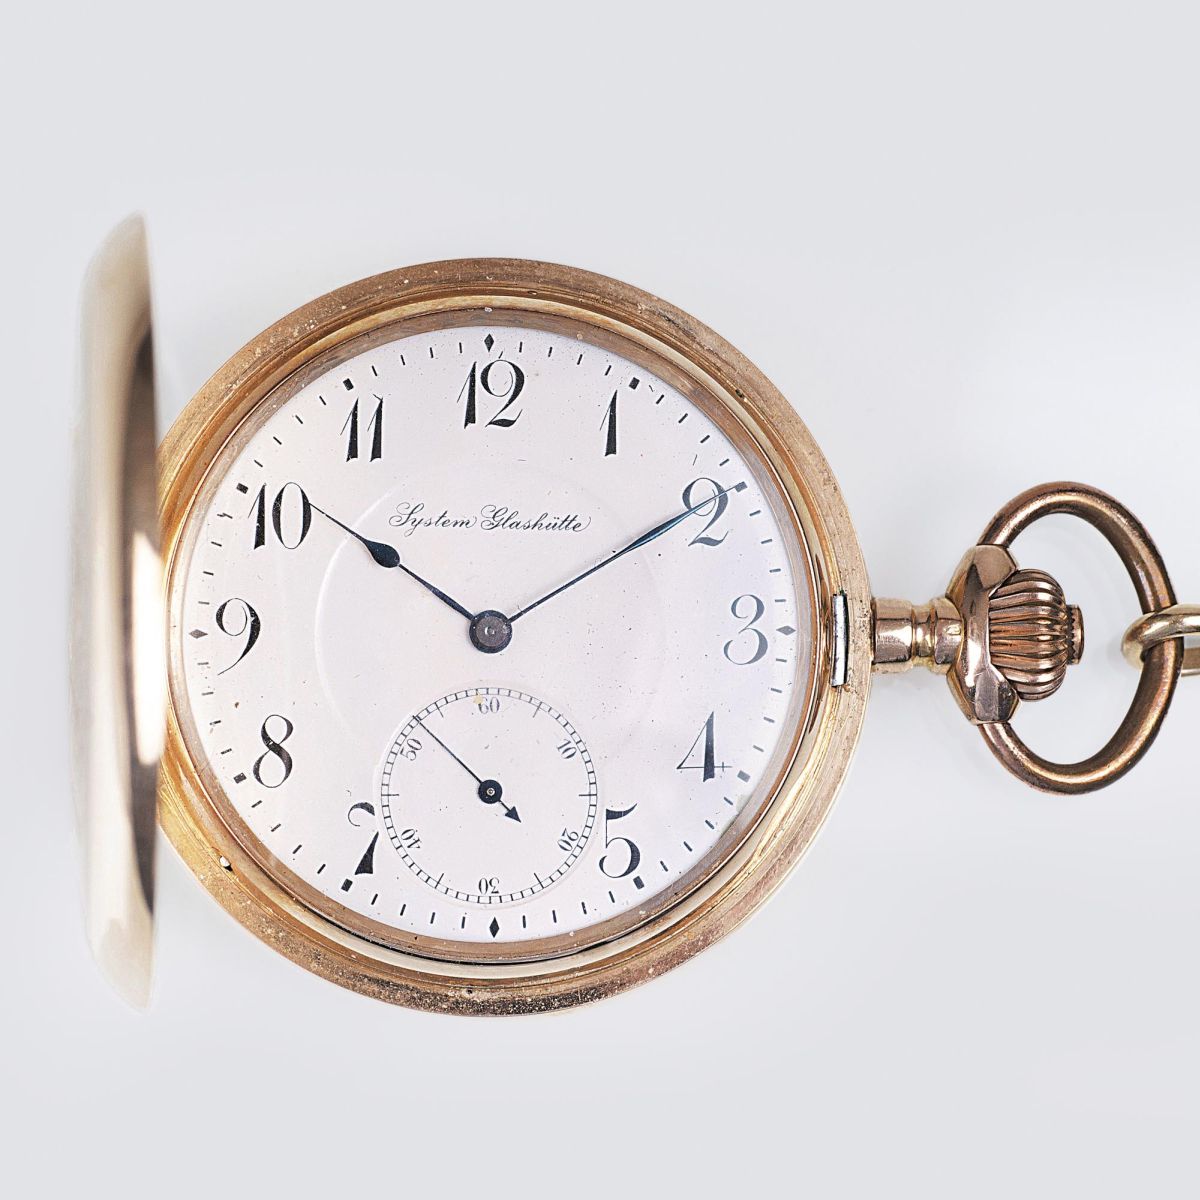 A Pocket Watch with Small Second by 'System Glashütte'